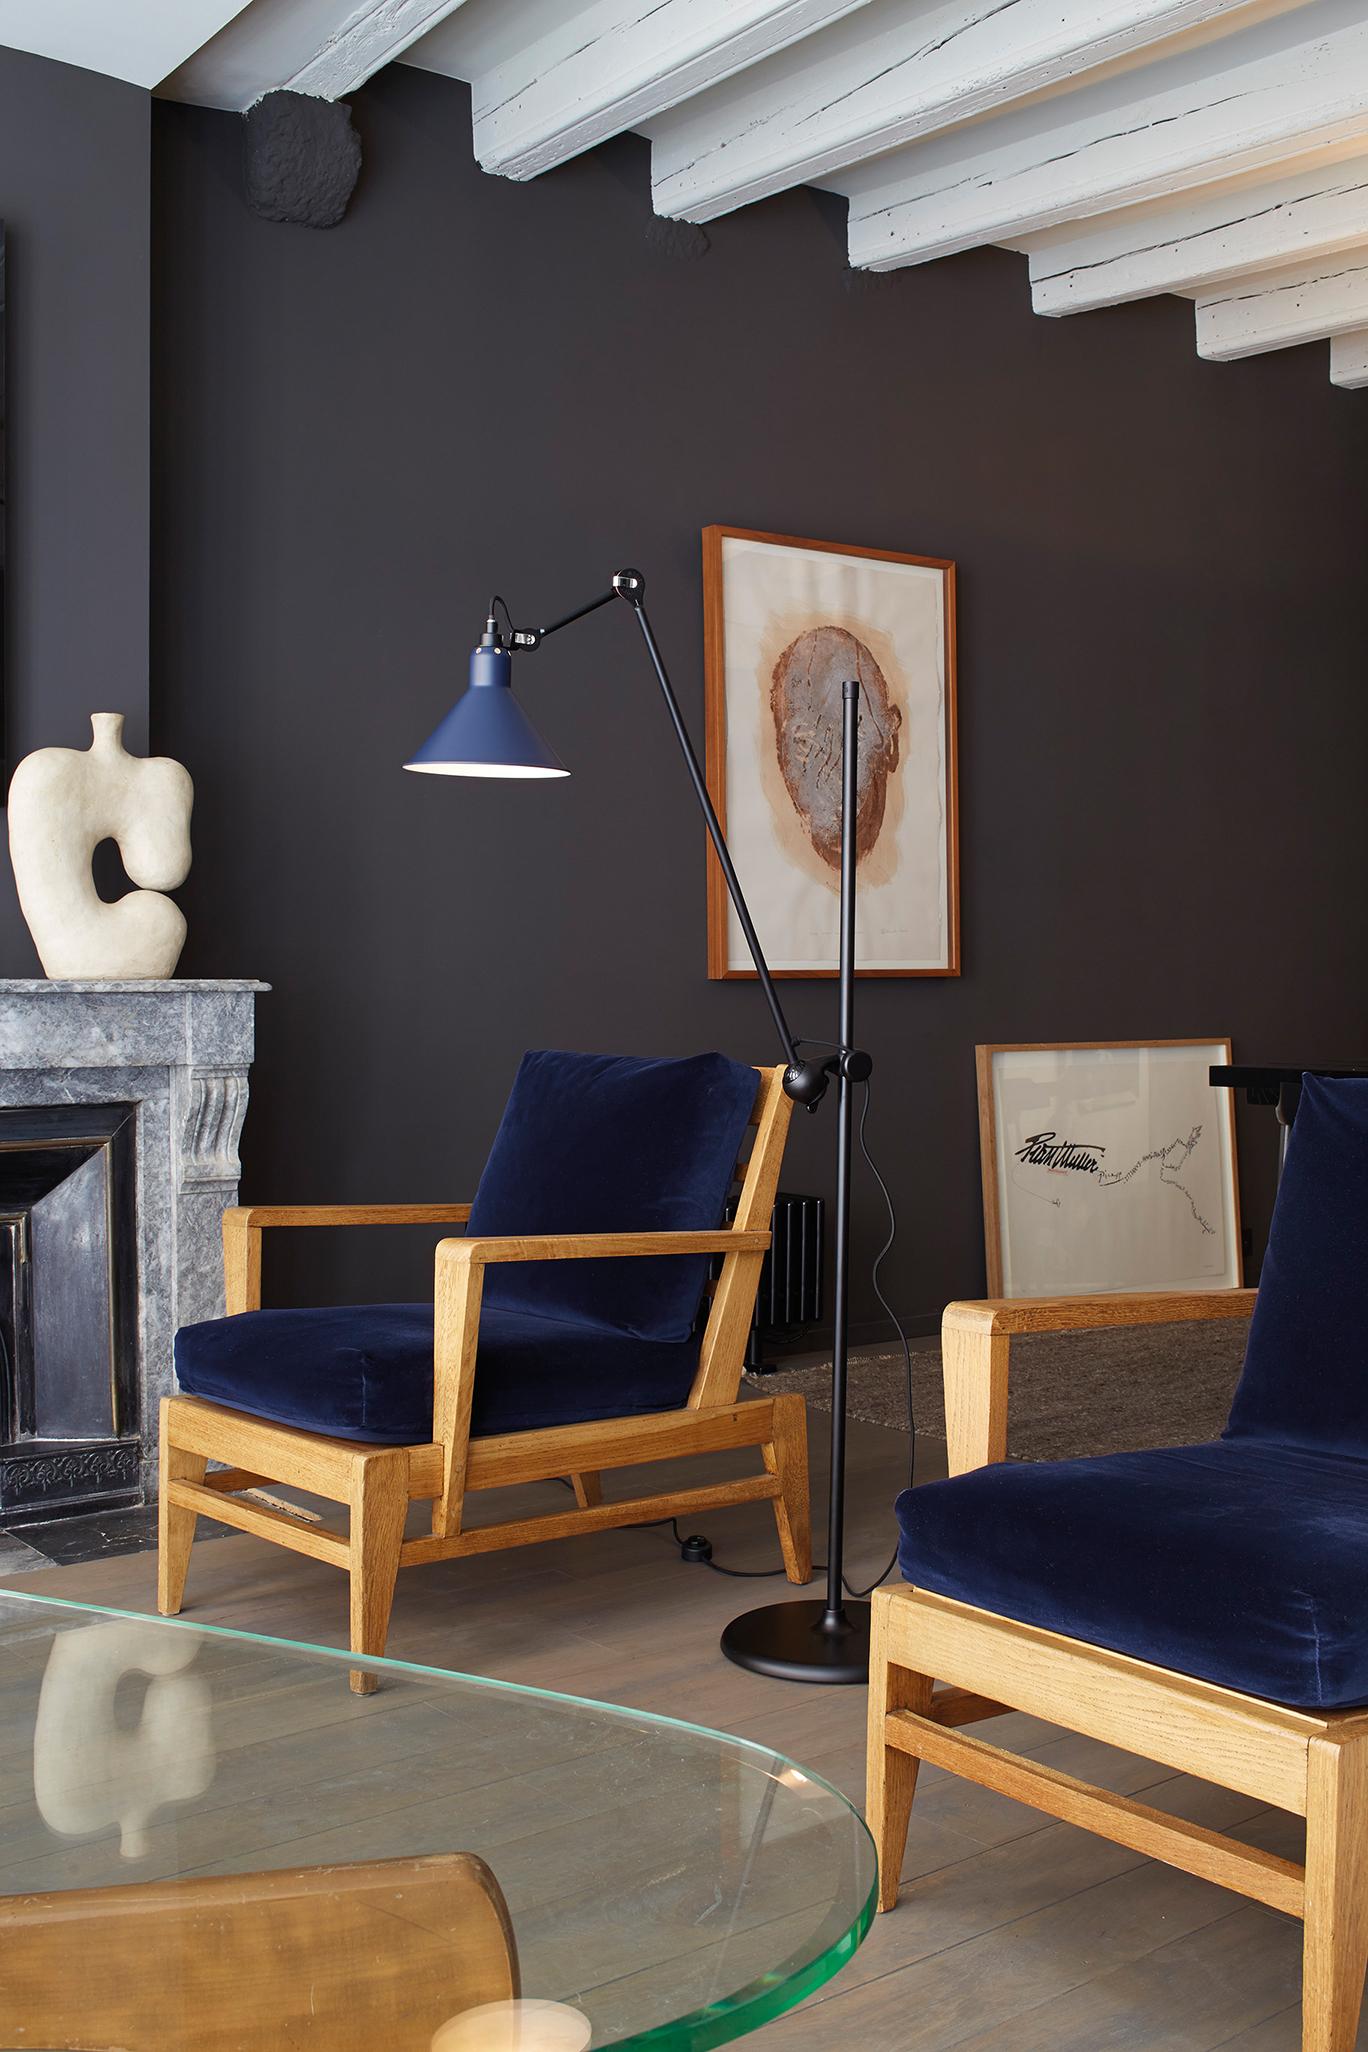 DCW Editions Lampe Gras N°215 Floor Lamp in Black Steel Arm and Copper Shade by Bernard-Albin Gras
 
 In 1921 Bernard-Albin GRAS designed a series of lamps for use in offices and in industrial environments. The GRAS lamp, as it was subsequently